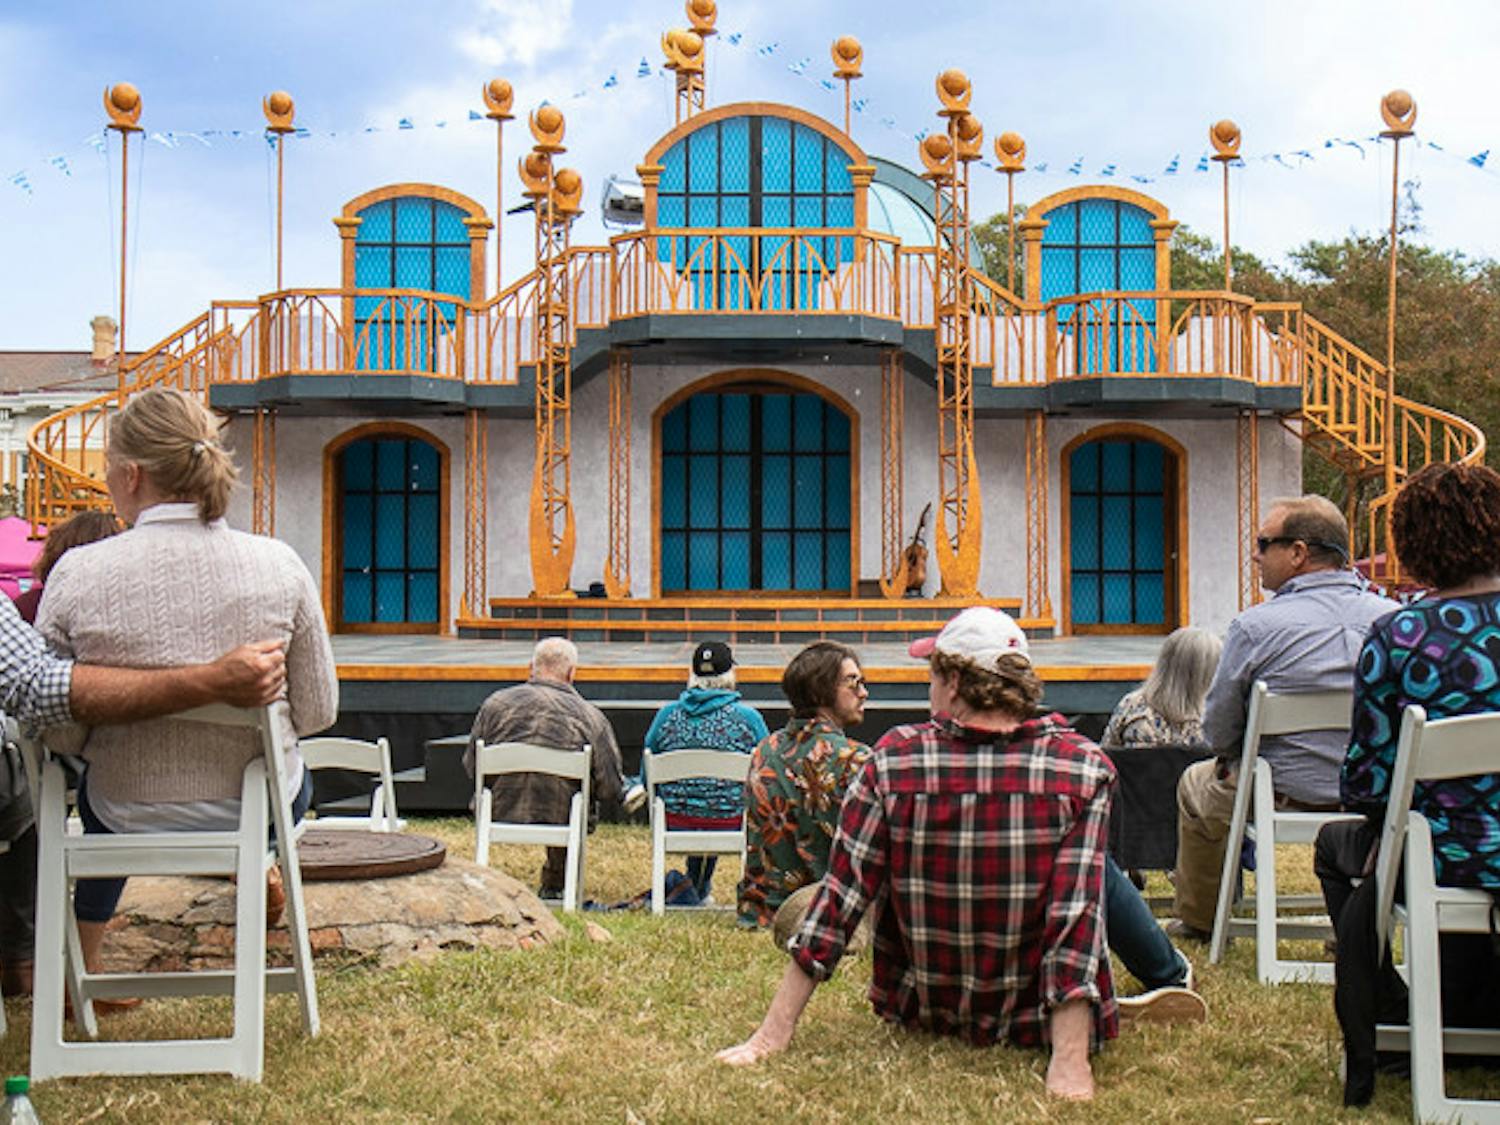 Cast members and spectators wait in front of the stage for the start of the final showing of "A Midsummer Night's Dream" on Oct. 9, 2022. The Shakesperean play was put on by the USC Department of Theatre and Dance.